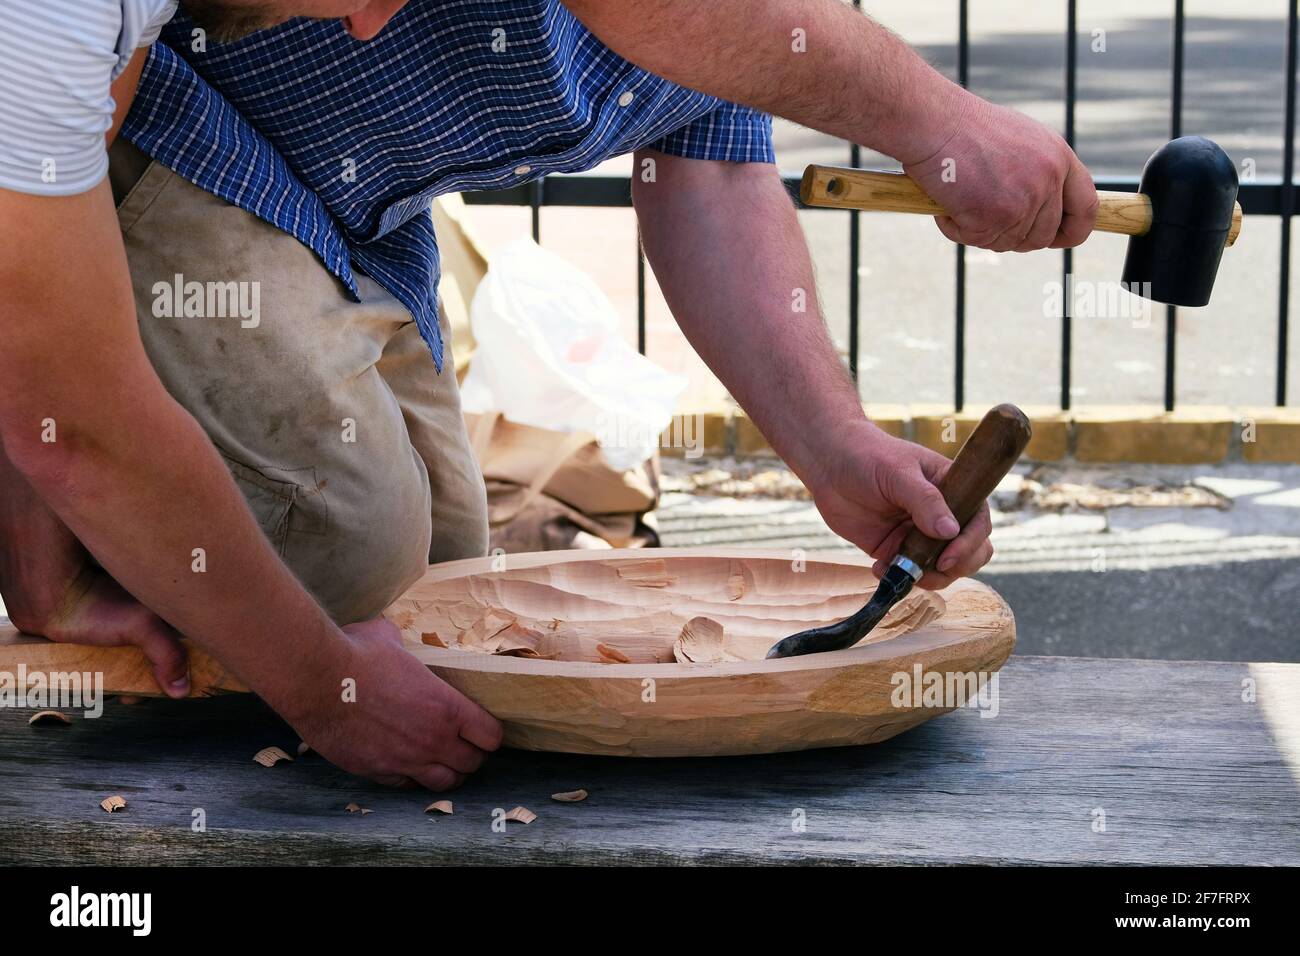 Wood carving. Two professional carpenters carve wooden product using a woodworking tool, hands close up. Carpentry and craftsmanship concept. Stock Photo